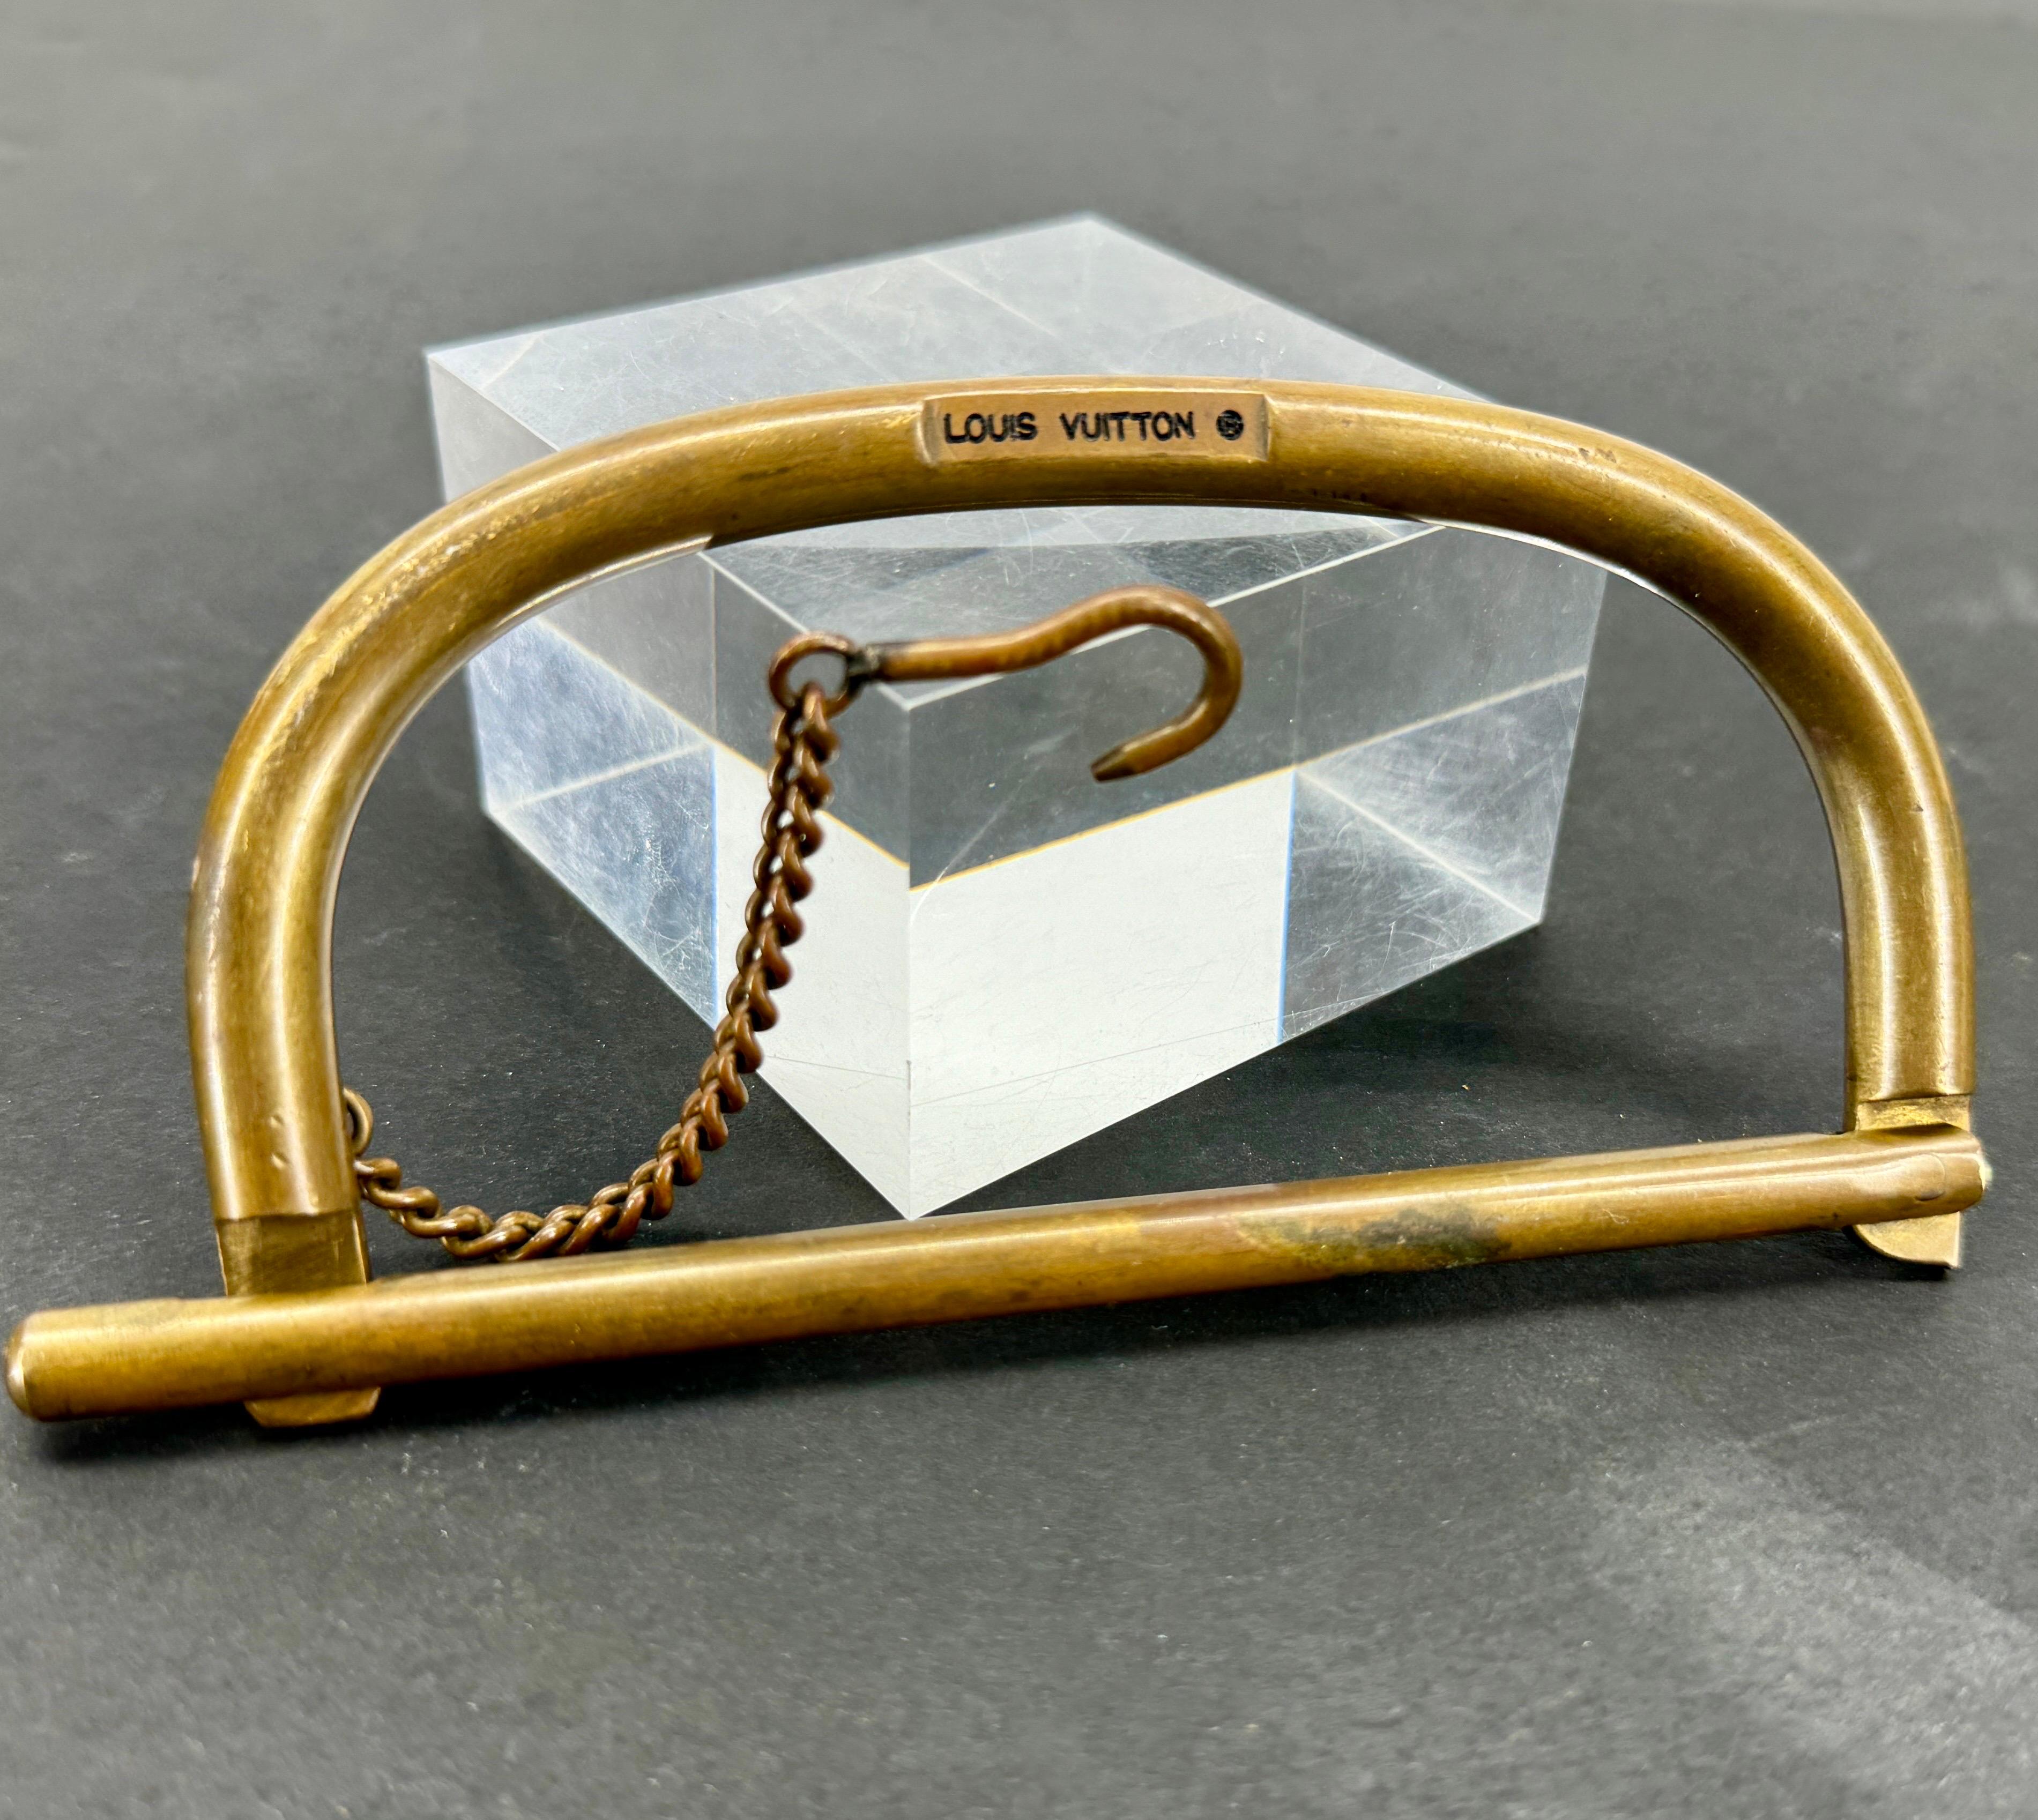 Old Brass Handle and Chain Hardware From an Authenticated Louis Vuitton Luggage Duffle Bag, marked Louis Vuitton.

This rare piece of hardware is almost impossible to come by. The marked piece was essential in keeping the duffle closed. 